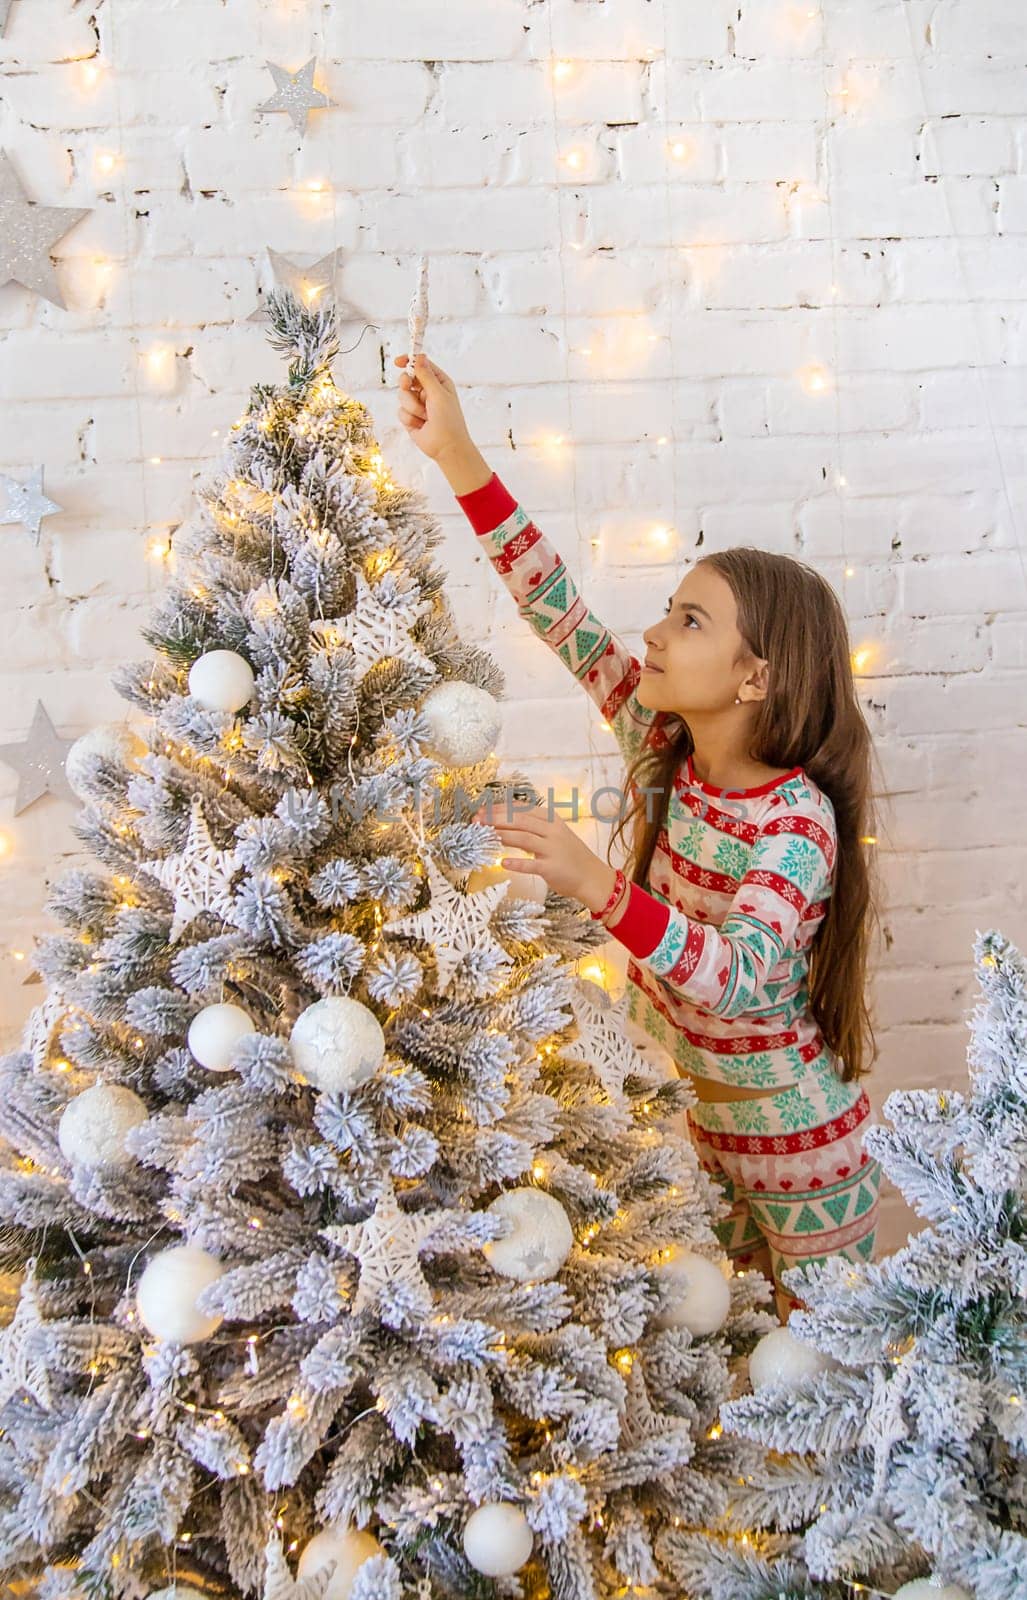 A child hangs a star on a Christmas tree. Selective focus. by yanadjana